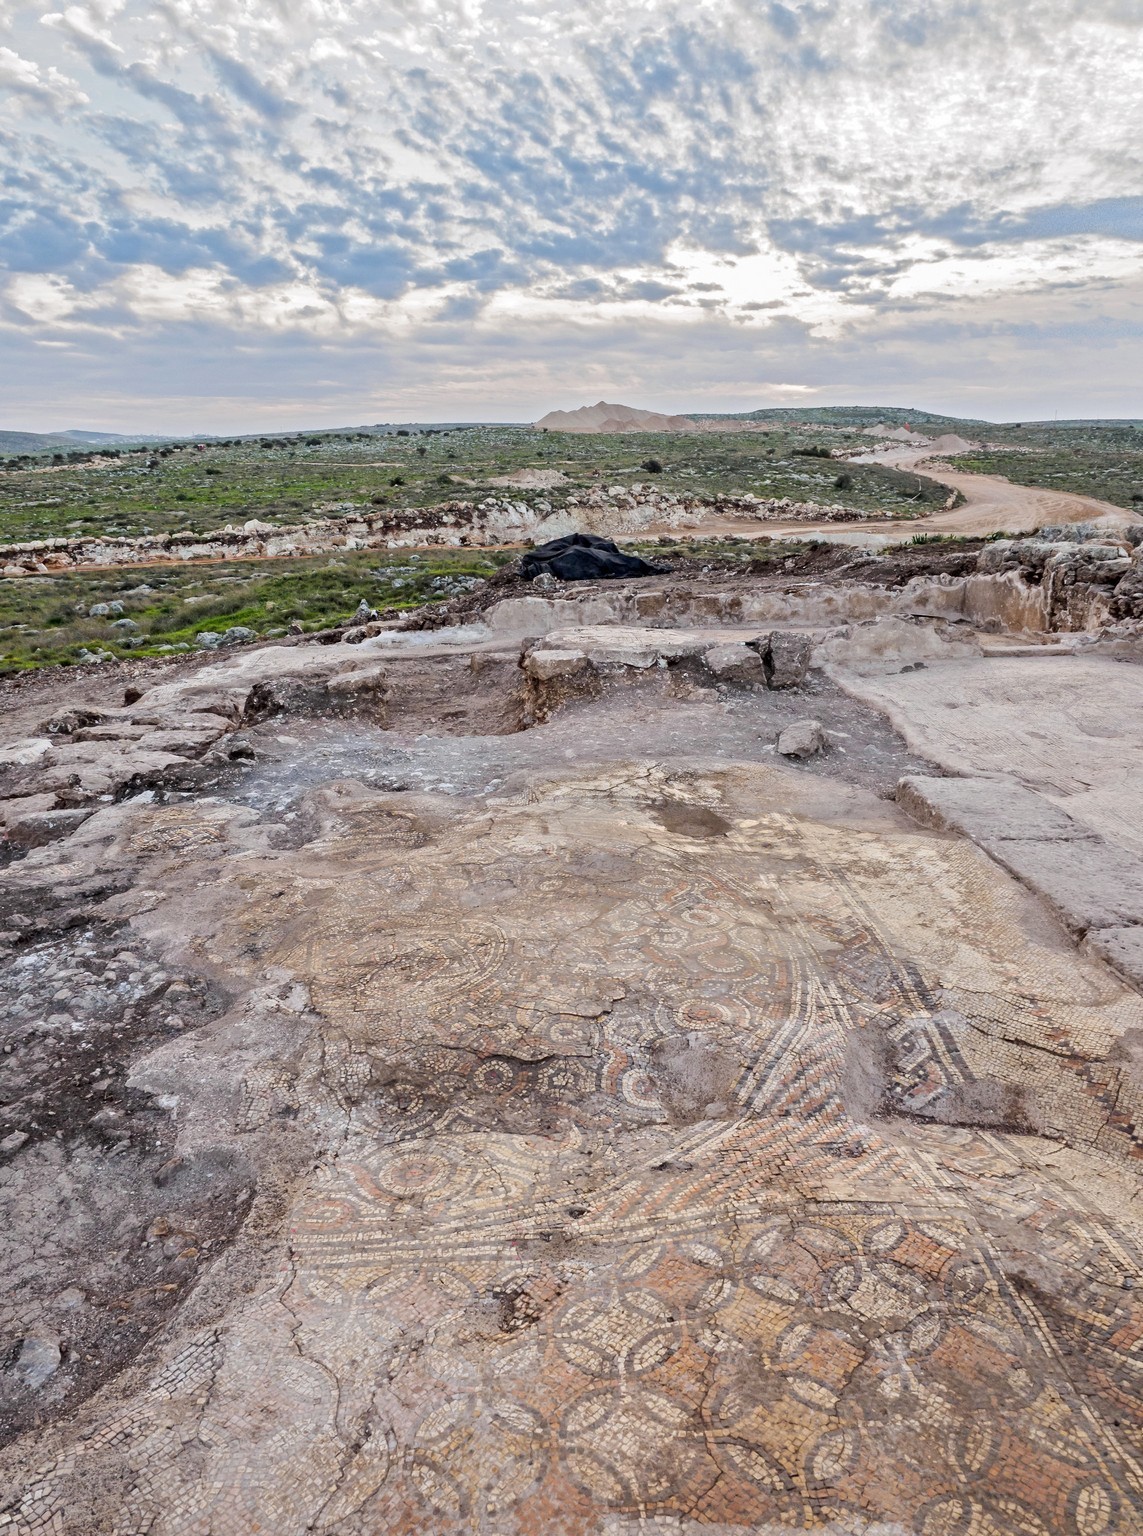 An aerial view of an ancient monastery with colorful mosaics. Photo by Assaf Peretz, Courtesy of the Israel Antiquities Authority.